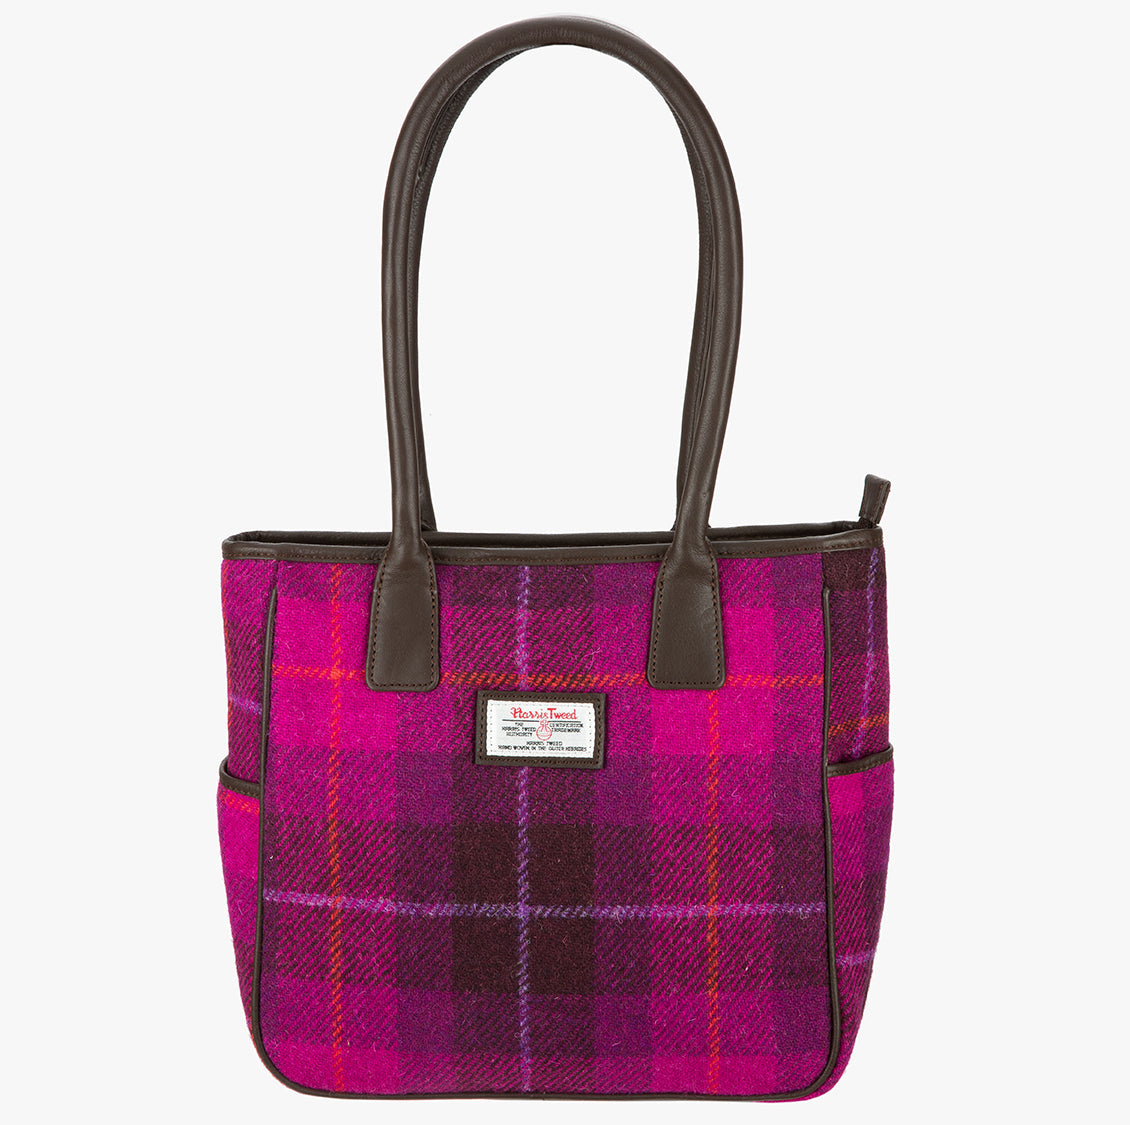 Harris Tweed tote bag in a cerise check with brown leather handles that go over the shoulder.  It has a pocket on each side of the bag trimmed with brown leather. It also has a harris tweed logo on the front of the bag in the middle which is sewn onto a leather label holder.